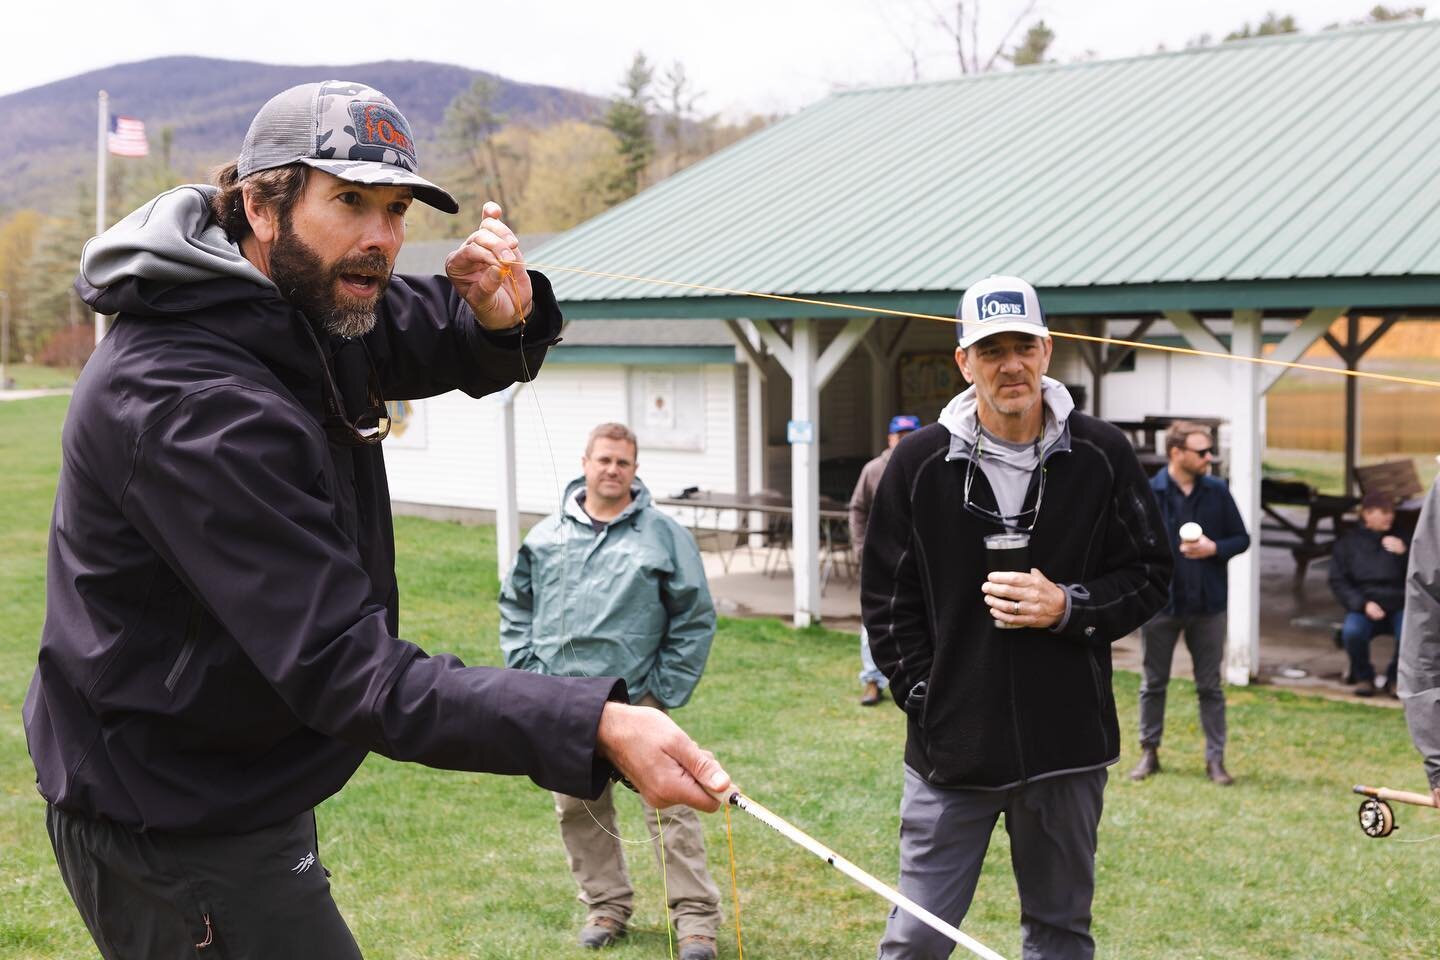 🎉 Thank you, thank you, thank you! The 2nd Annual Battenkill Fly Fishing Festival was an incredible success, and it's all thanks to YOU! A special shoutout to our participants, presenters, vendors, organizers, hosts, musicians and everyone who made 